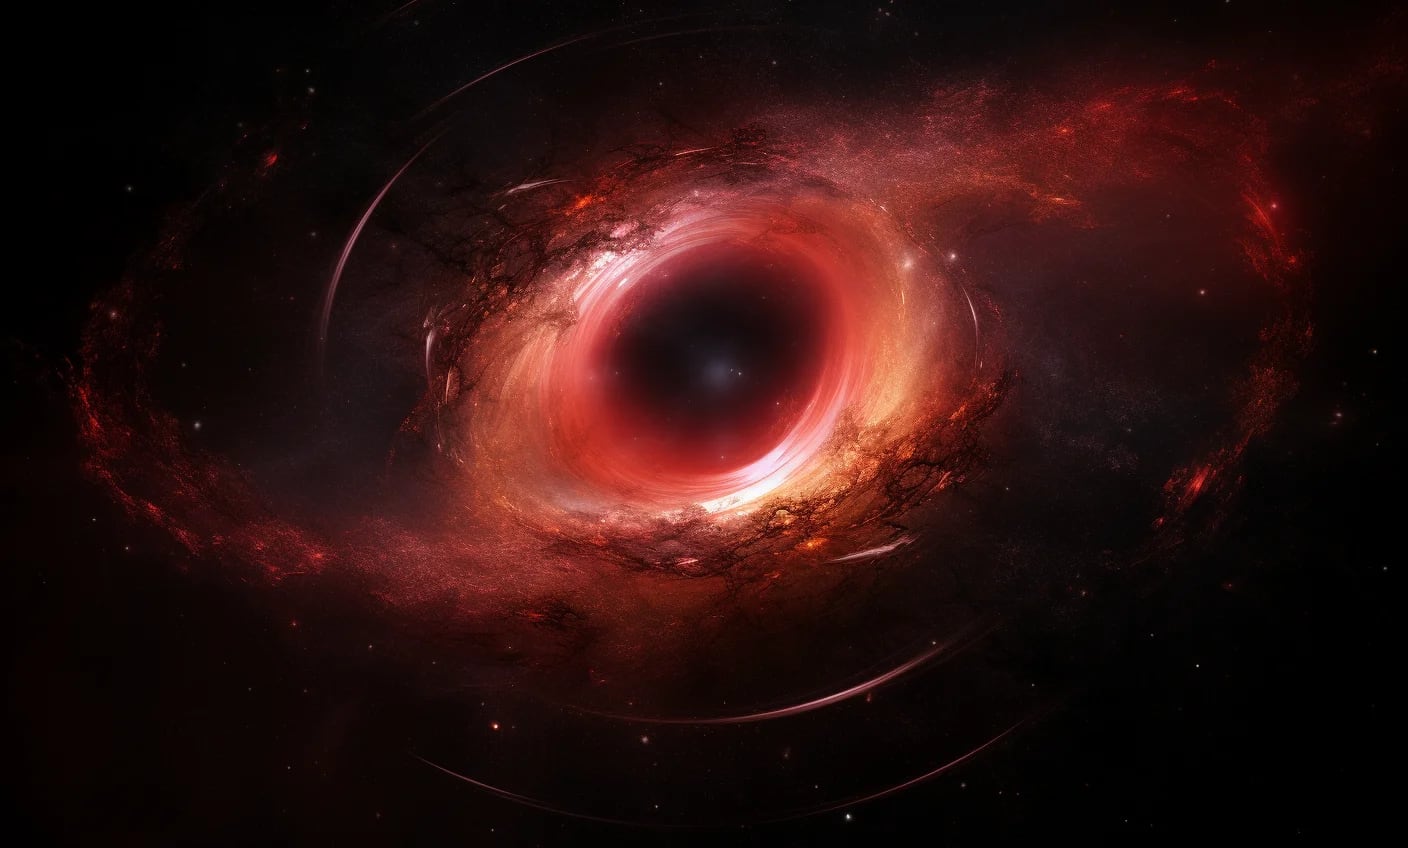 Black holes and gravitational waves: What is Einstein's theory that science has reconfirmed?